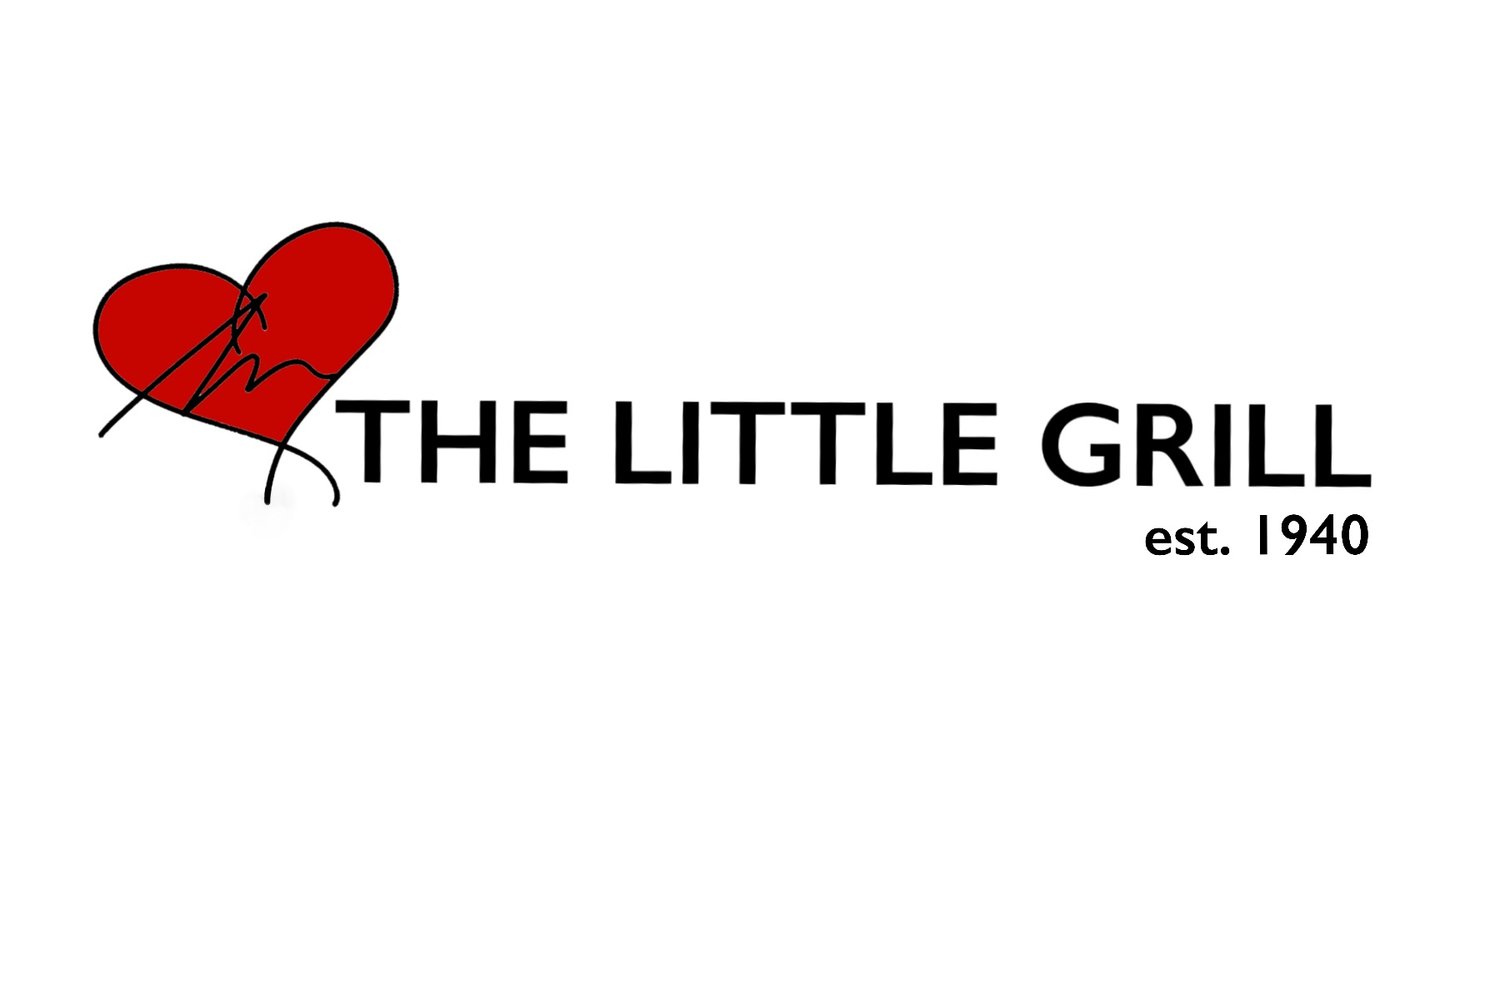 The Little Grill